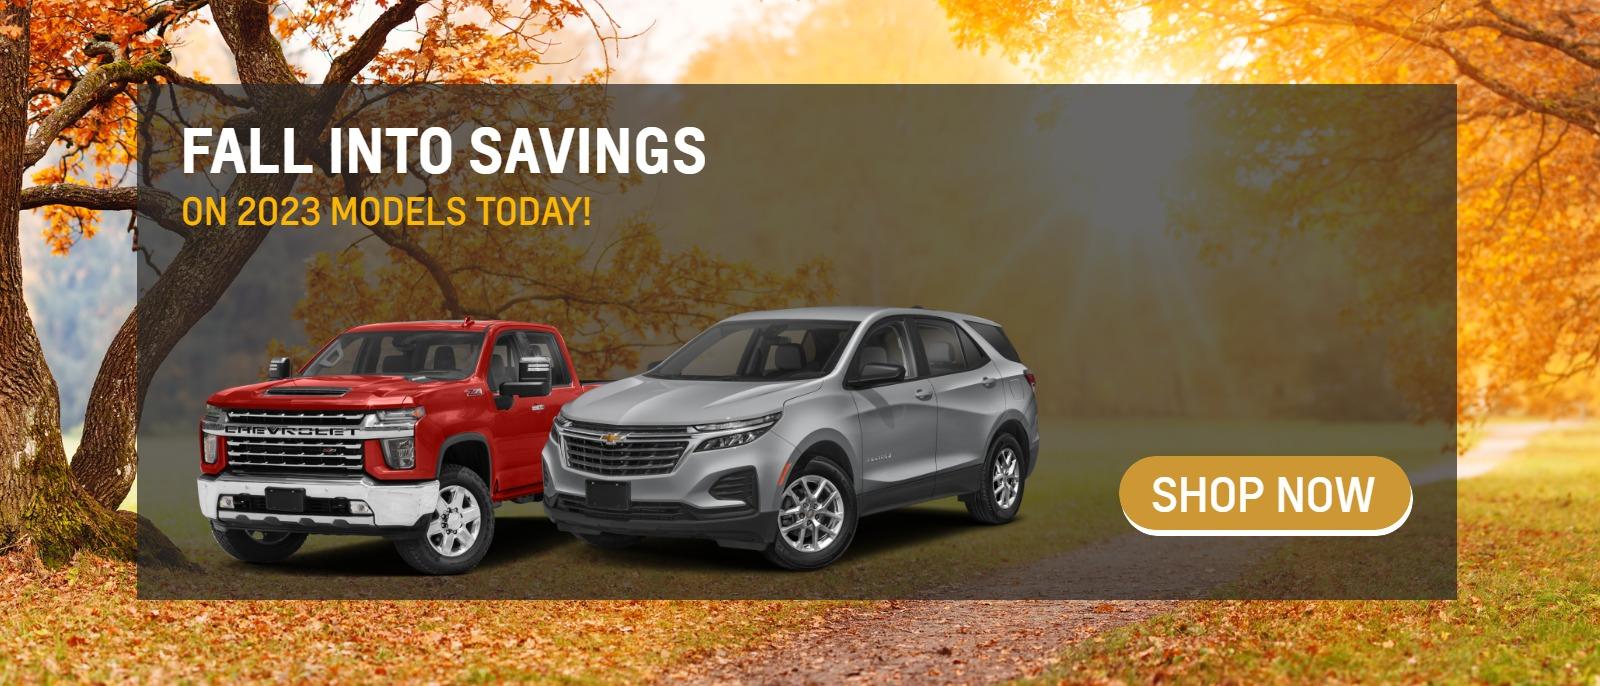 Fall into Saving, On 2023 Models Today!